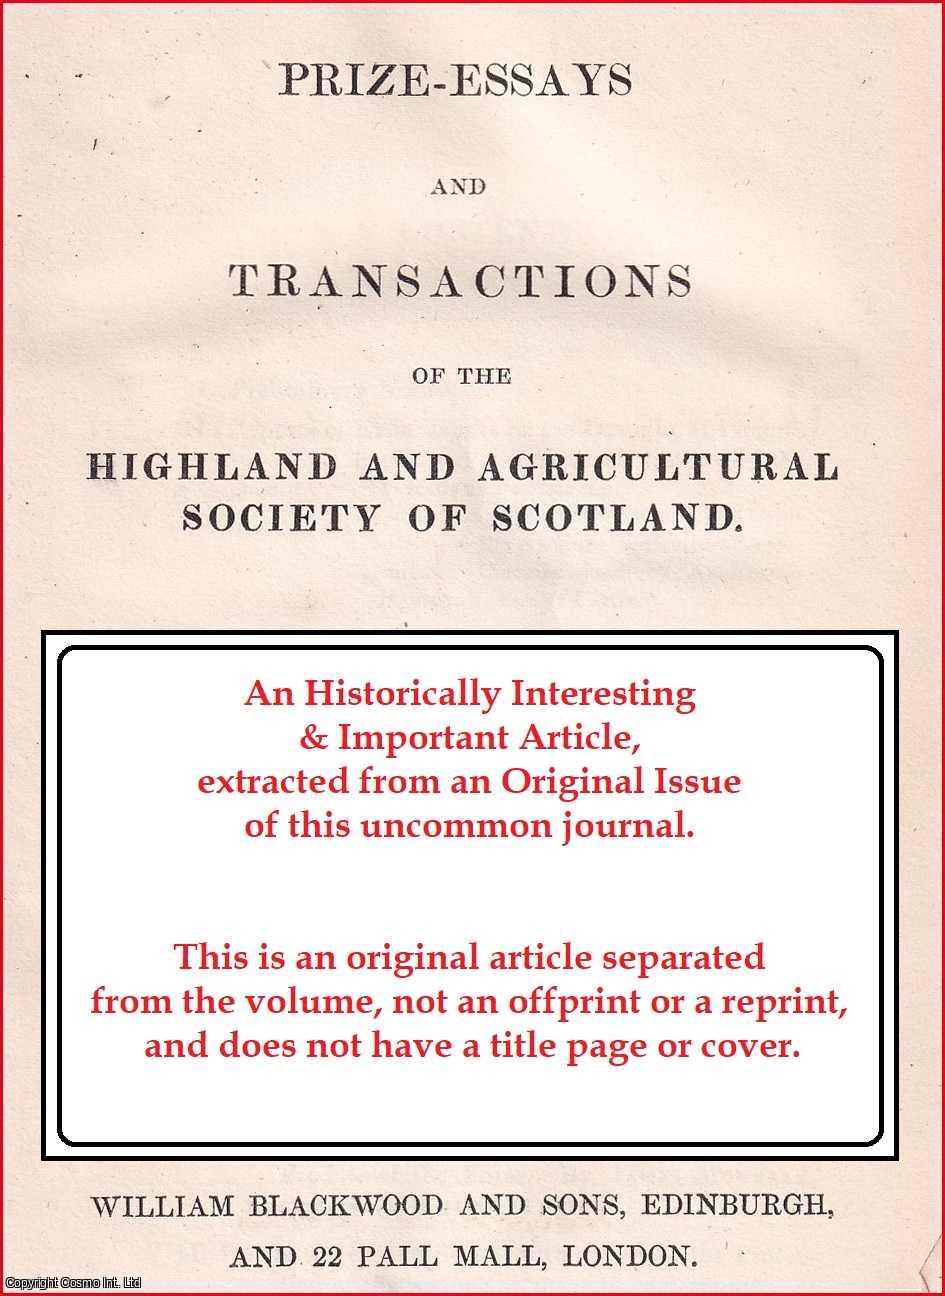 Mr. John Leith - The Cultivation of Waste Lands near Wick. An uncommon original article from the Prize Essays and Transactions of the Highland Society of Scotland, 1831.